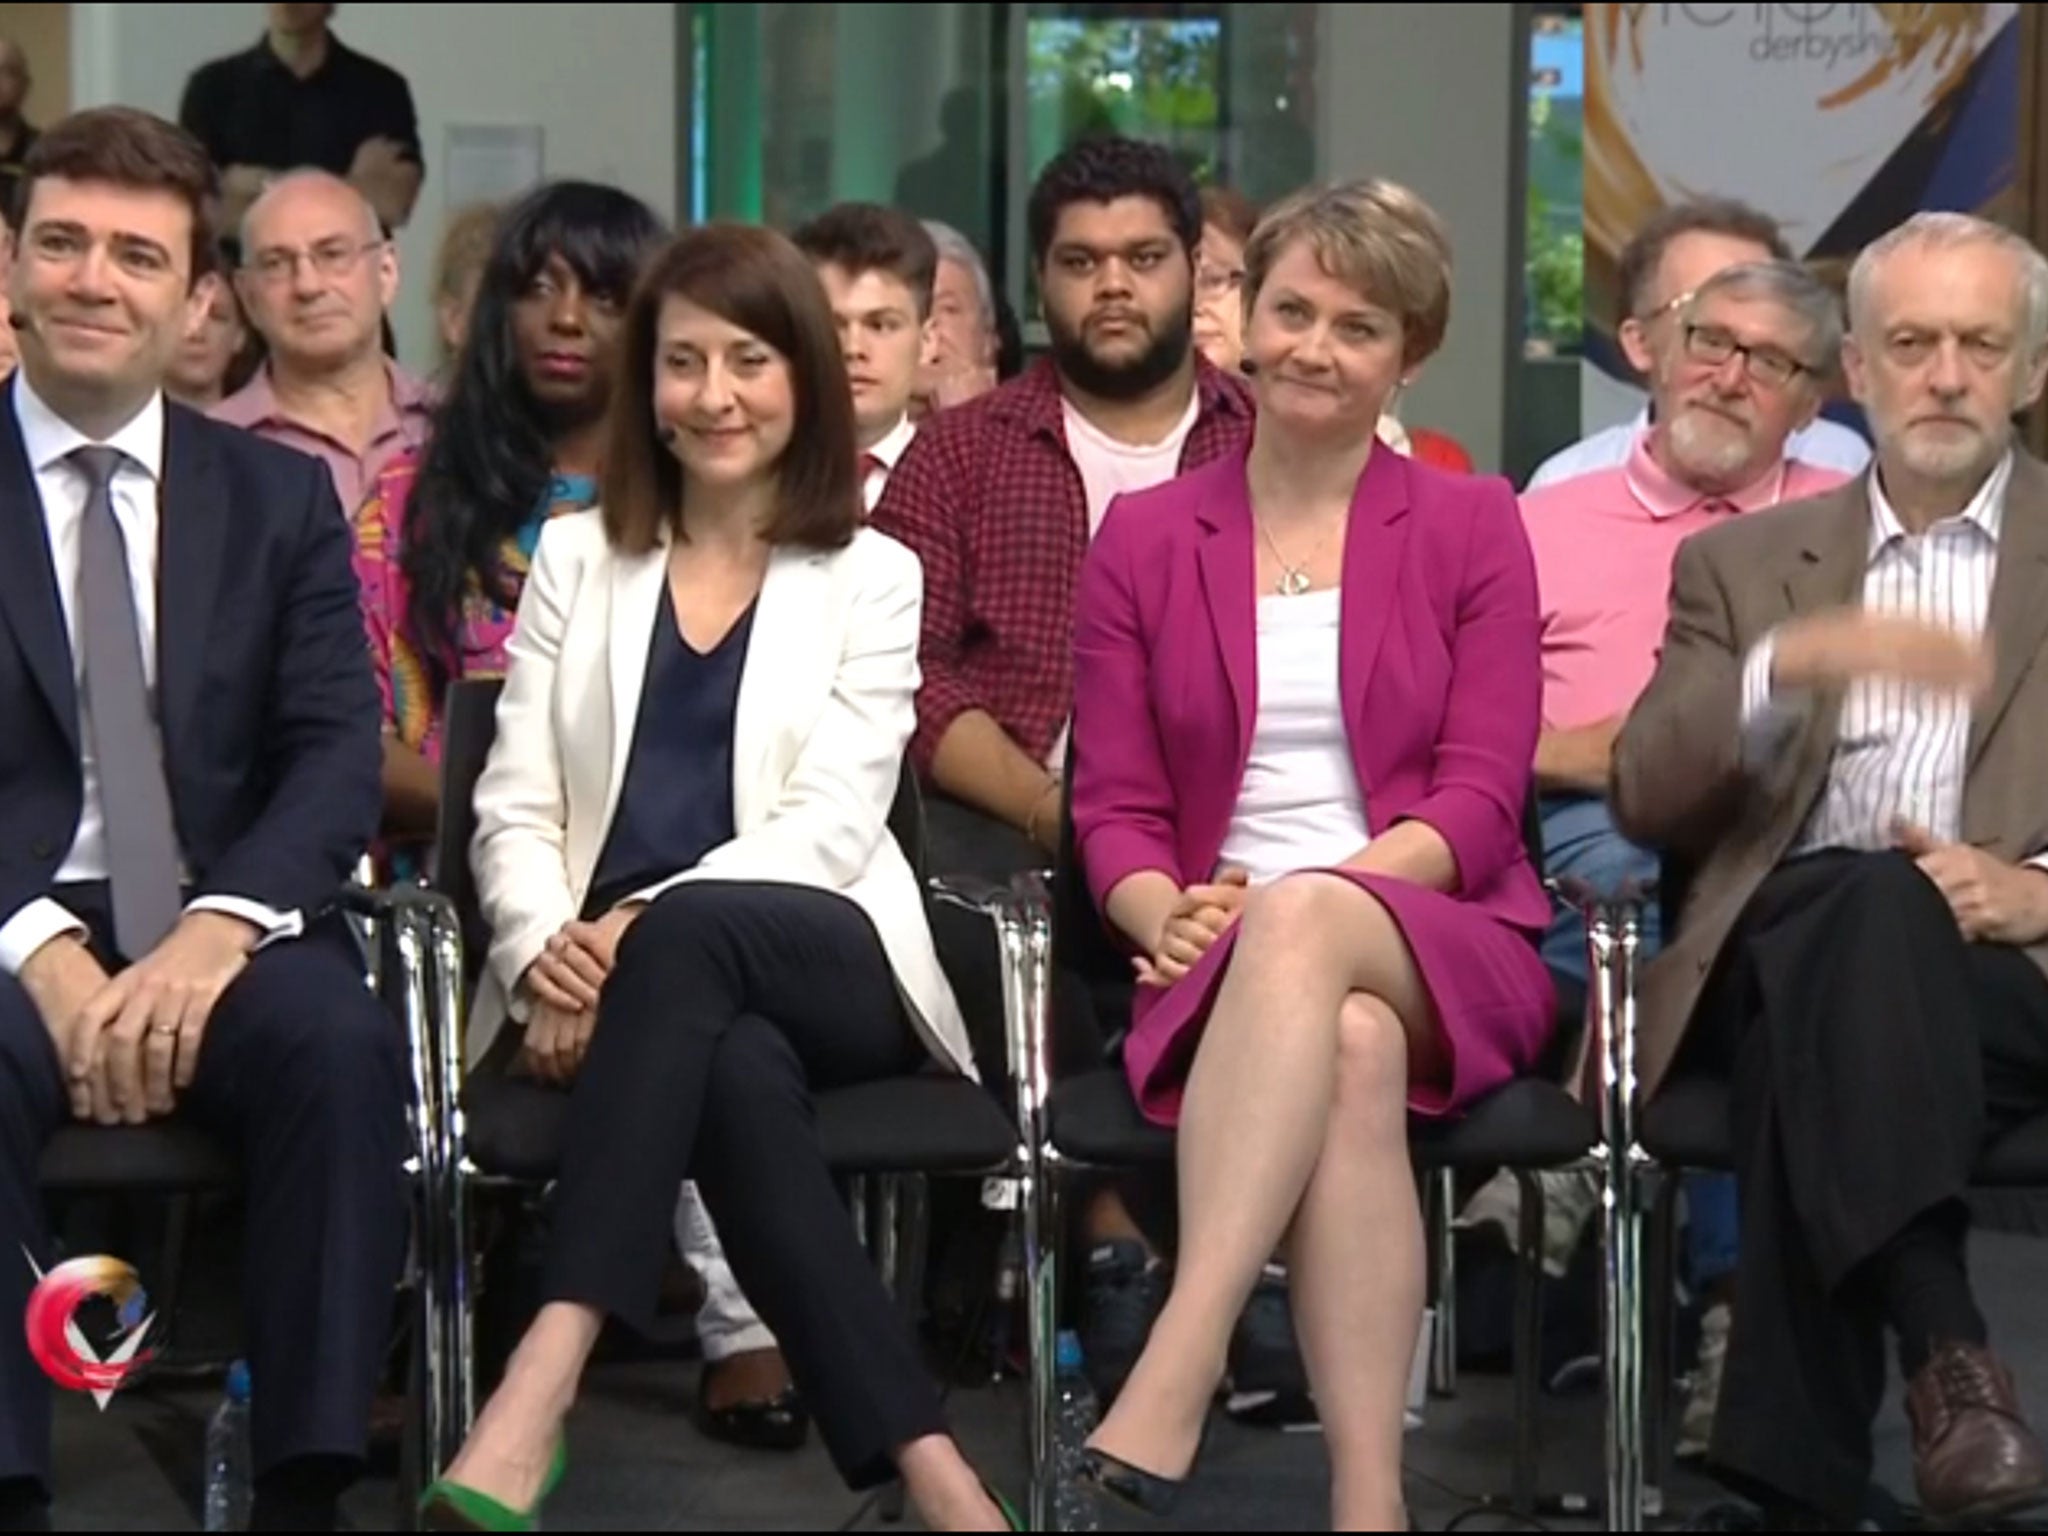 From left to right: Andy Burnham, Liz Kendall, Yvette Cooper and Jeremy Corbyn on Victoria Derbyshire’s BBC2 show